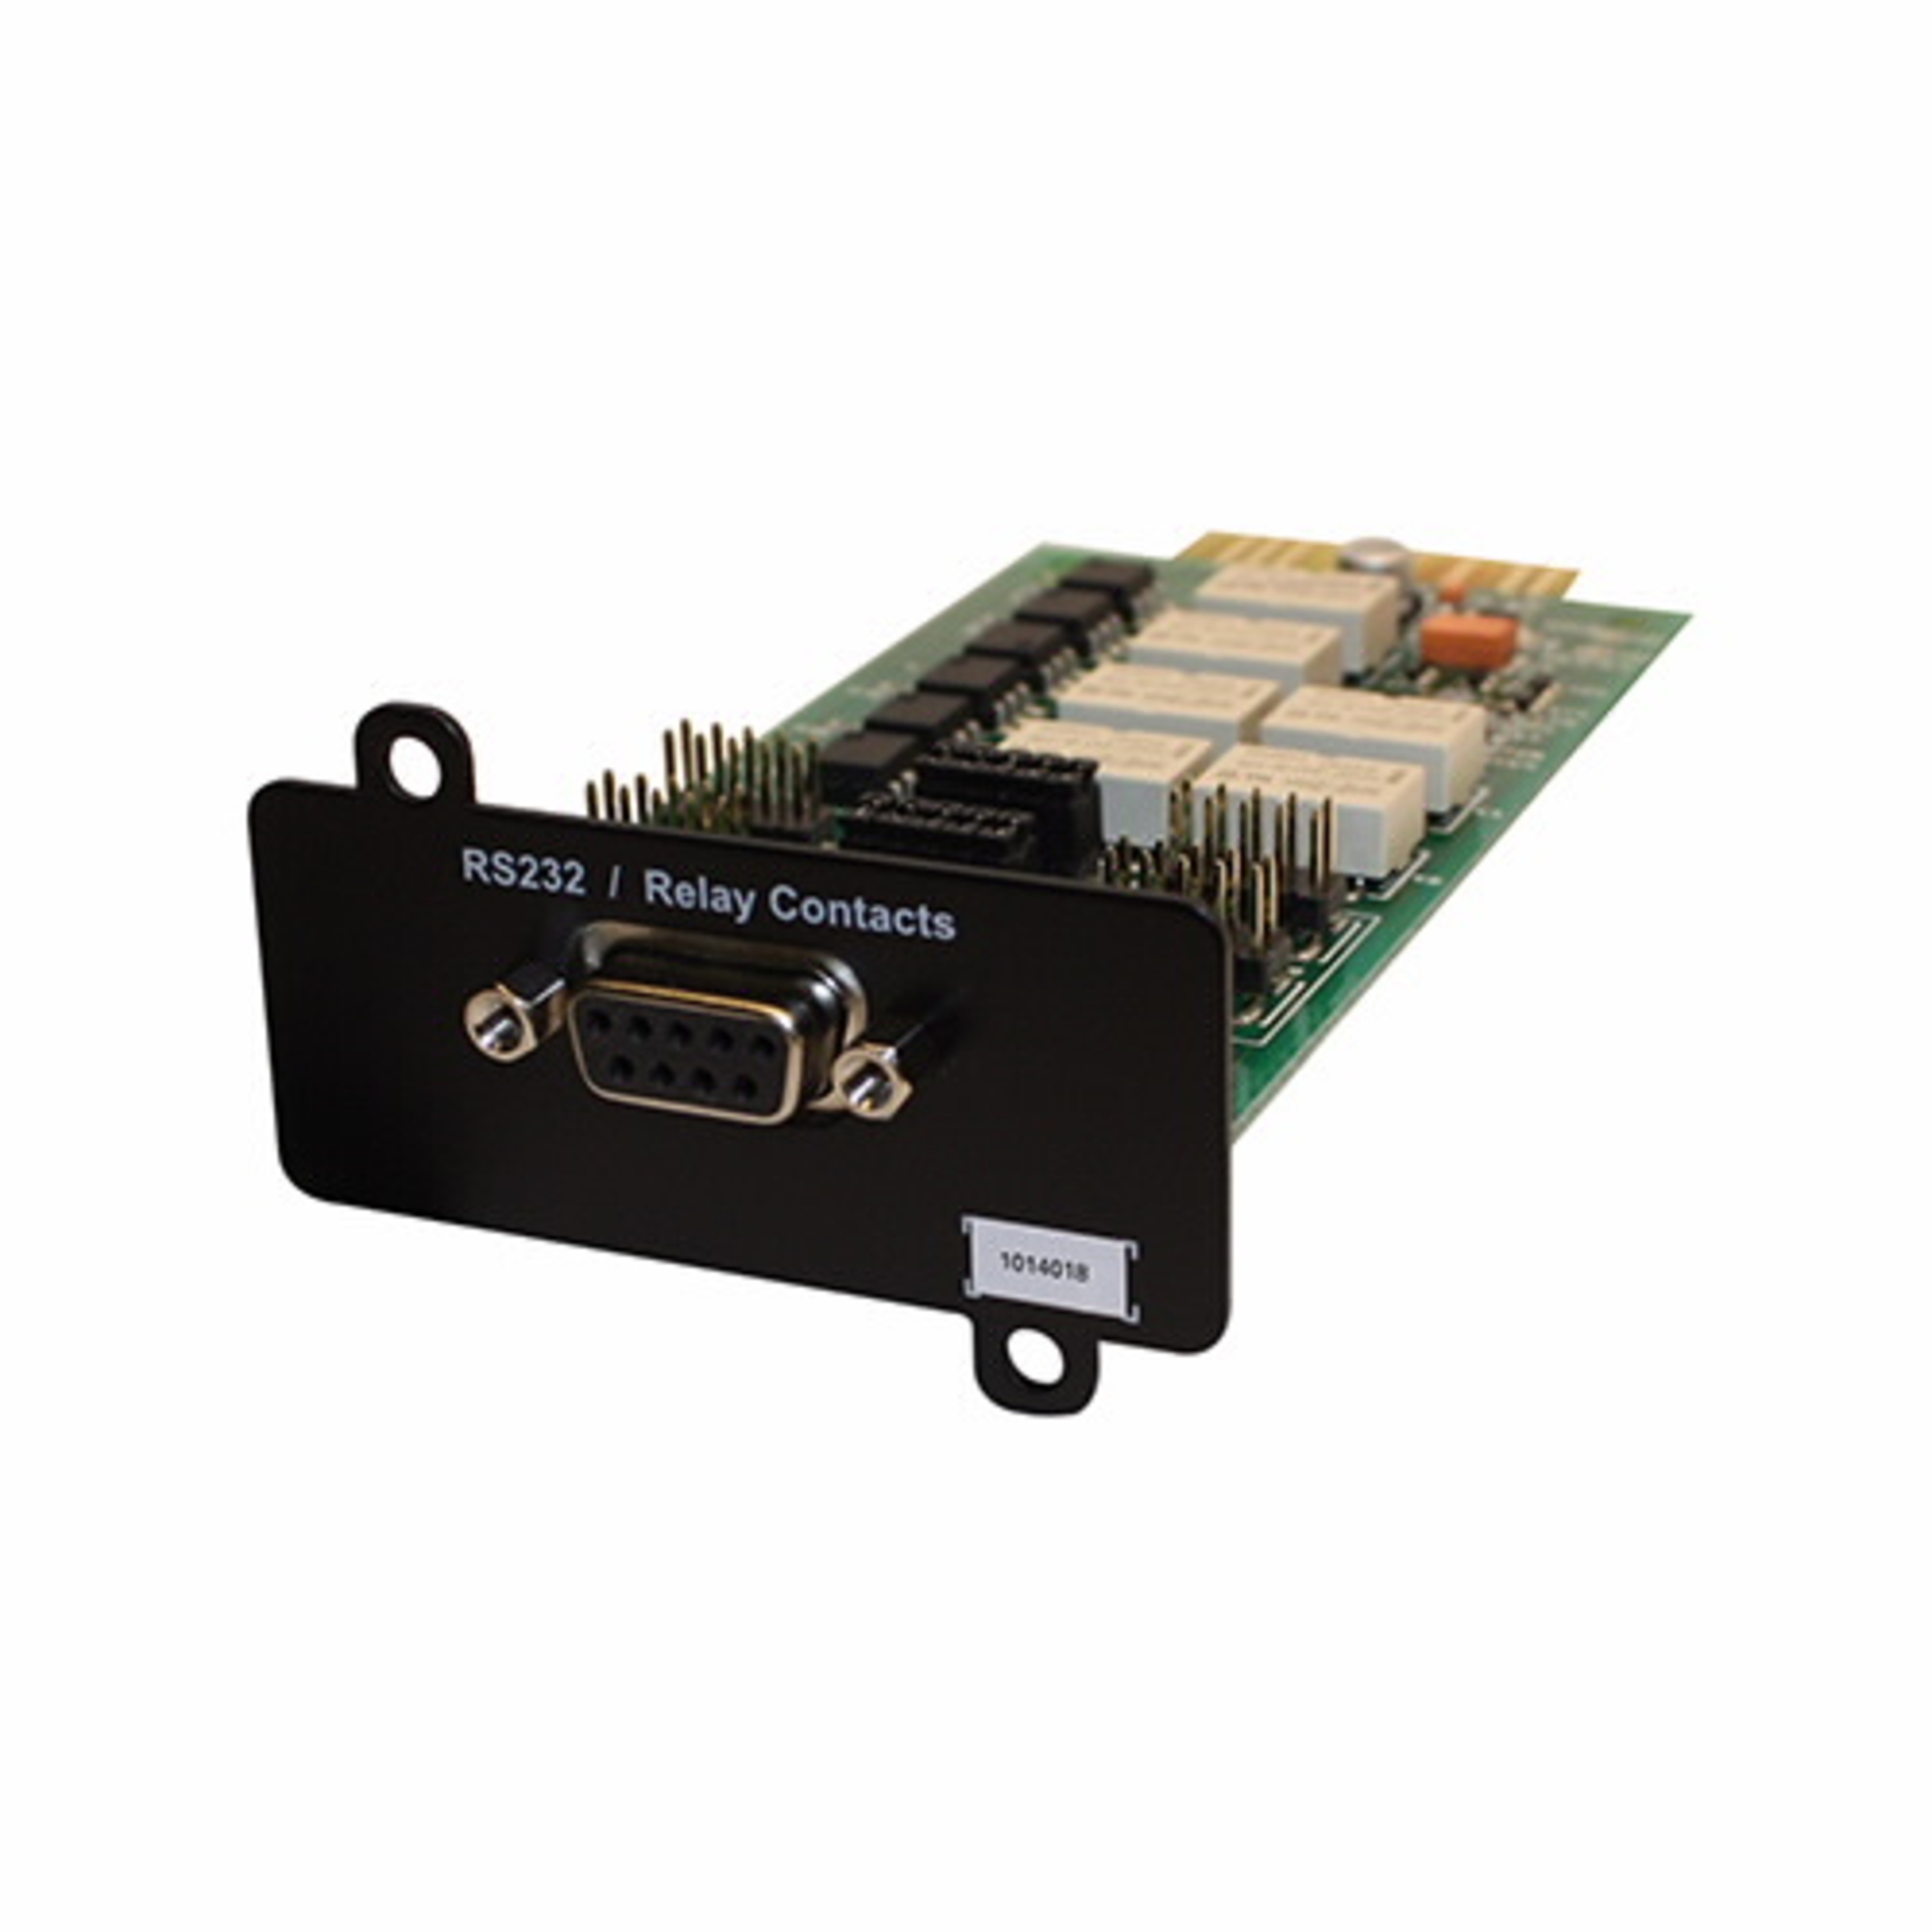 Powerware RELAY-MS Powerware RELAY-MS  Variable Frequency Drives HVAC Drives – Communication Cards https://gesrepair.com/wp-content/uploads/2022/Eaton/Images/Powerware_RELAY-MS_Variable_Frequency_Drive.jpg